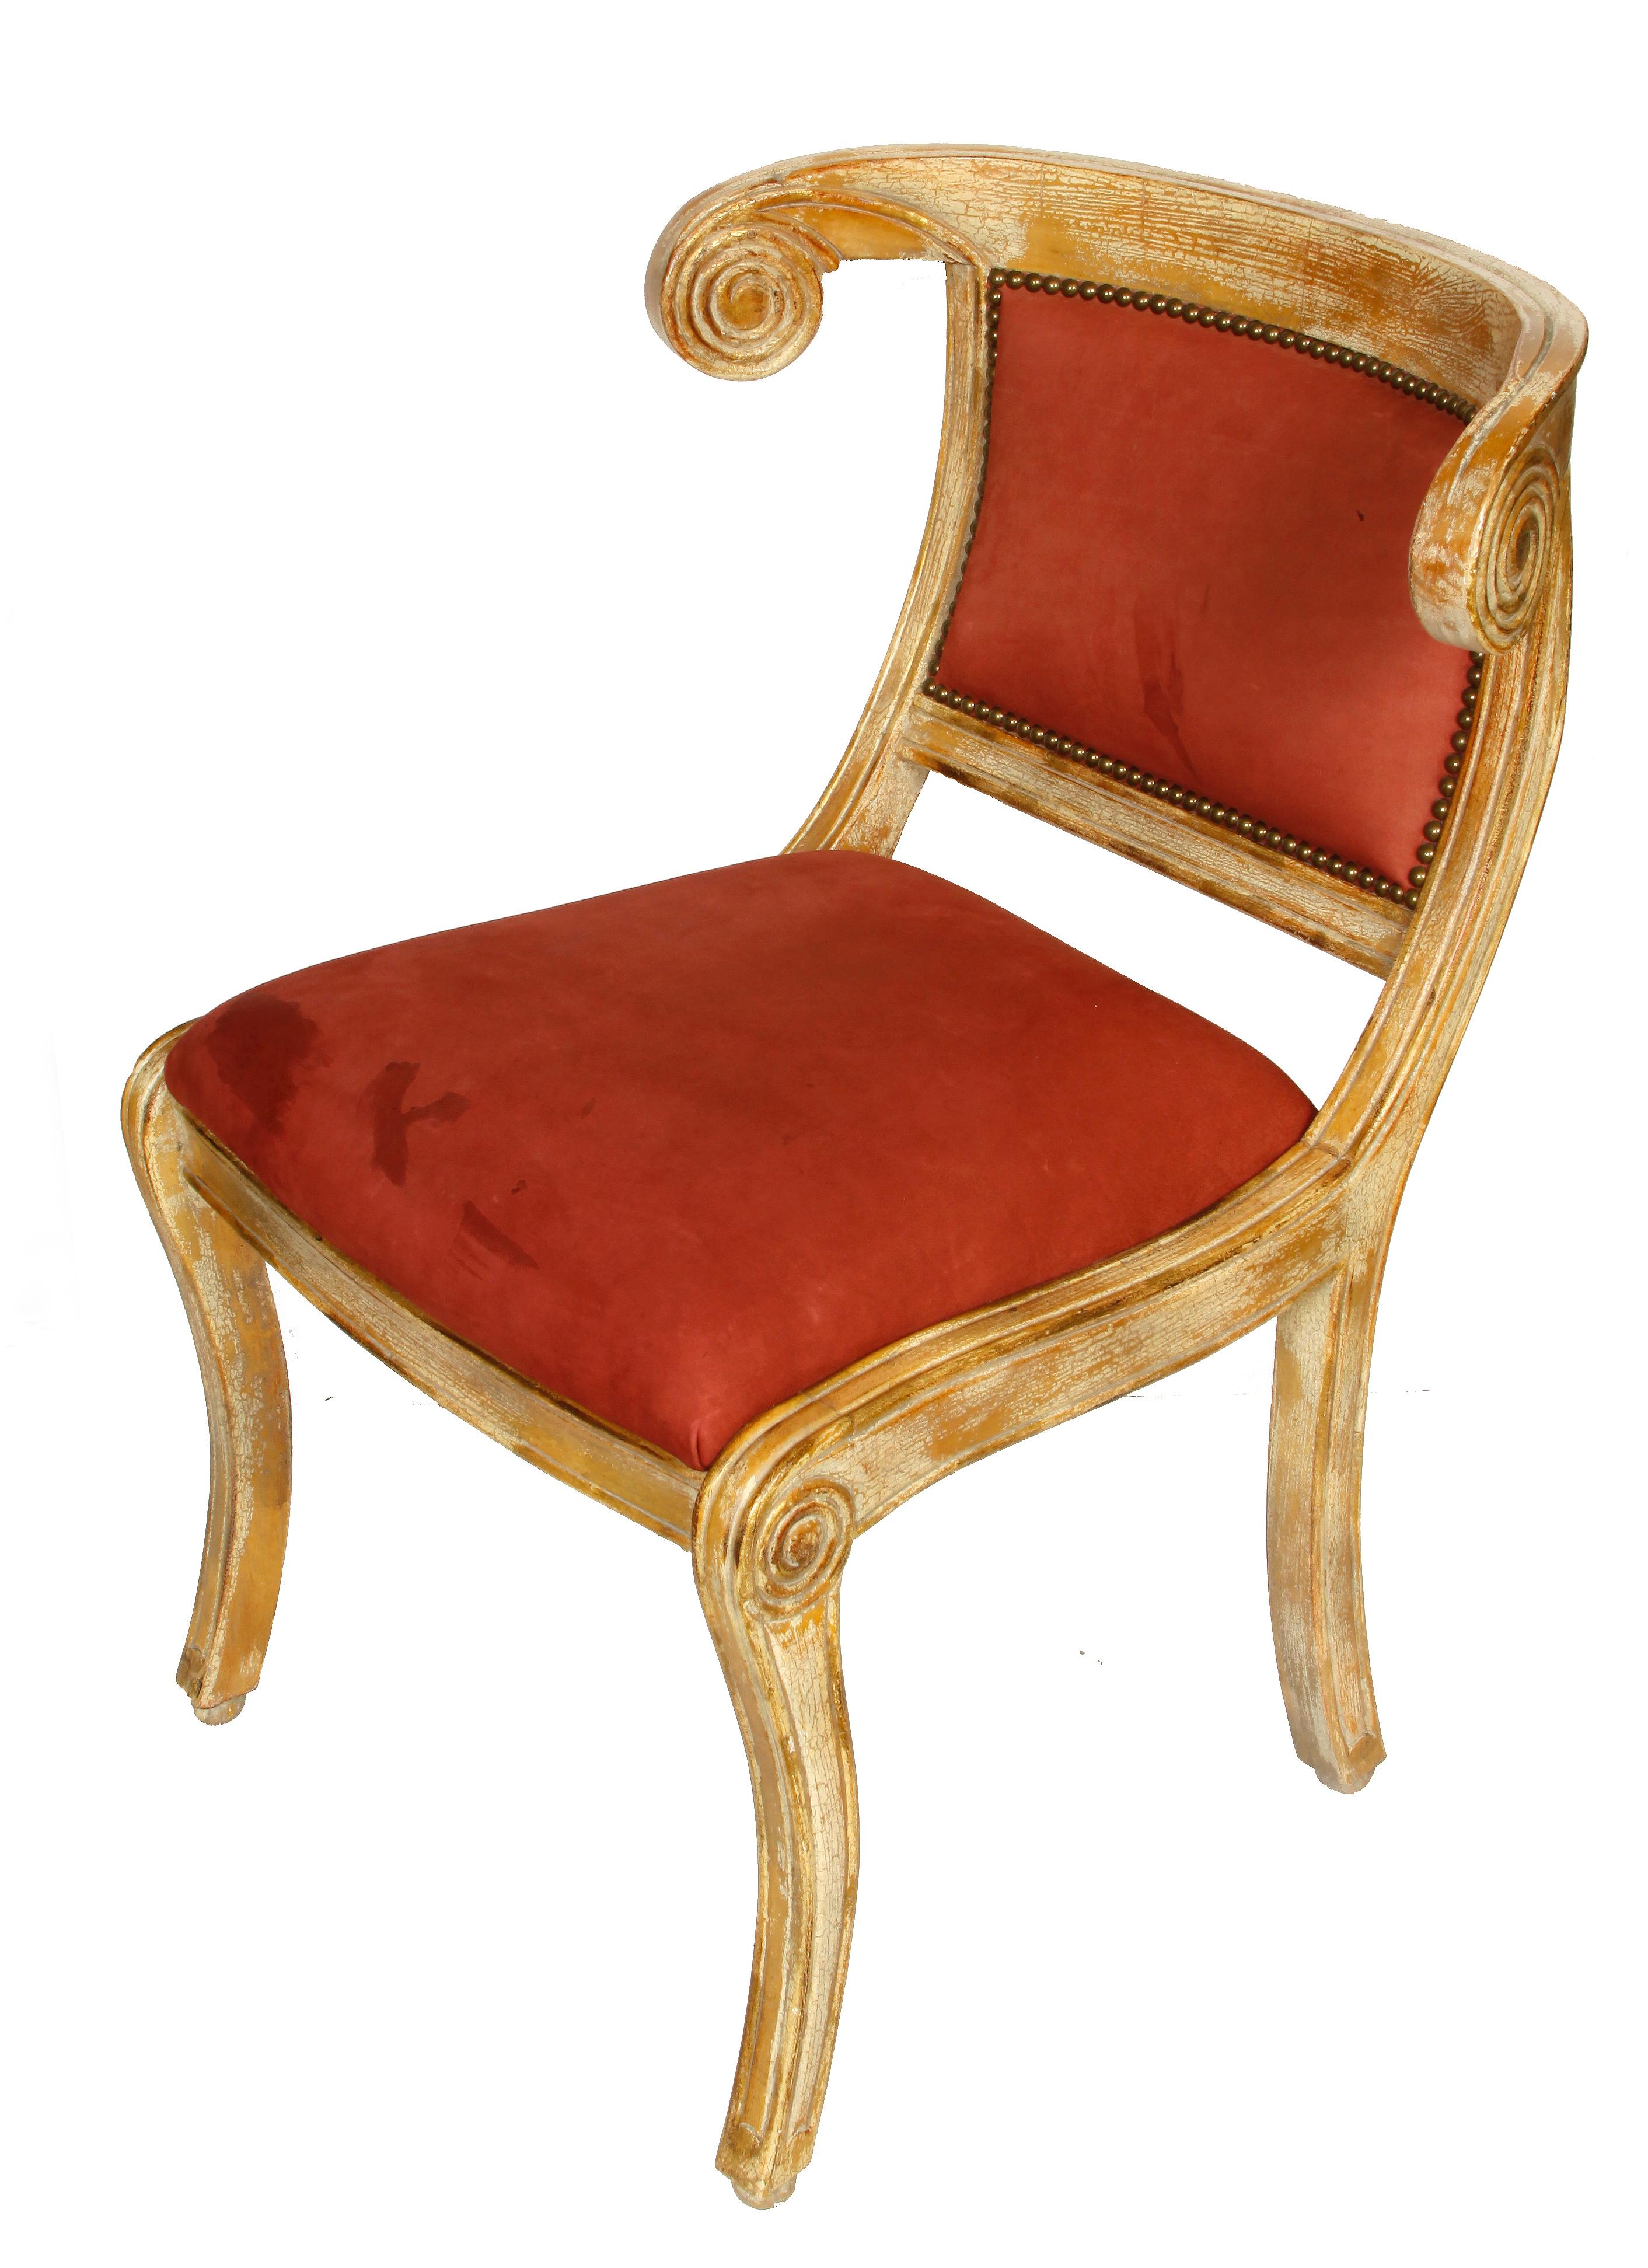 Cerused oak directoire style side chair, curved back with brass nailhead trim on seat back.